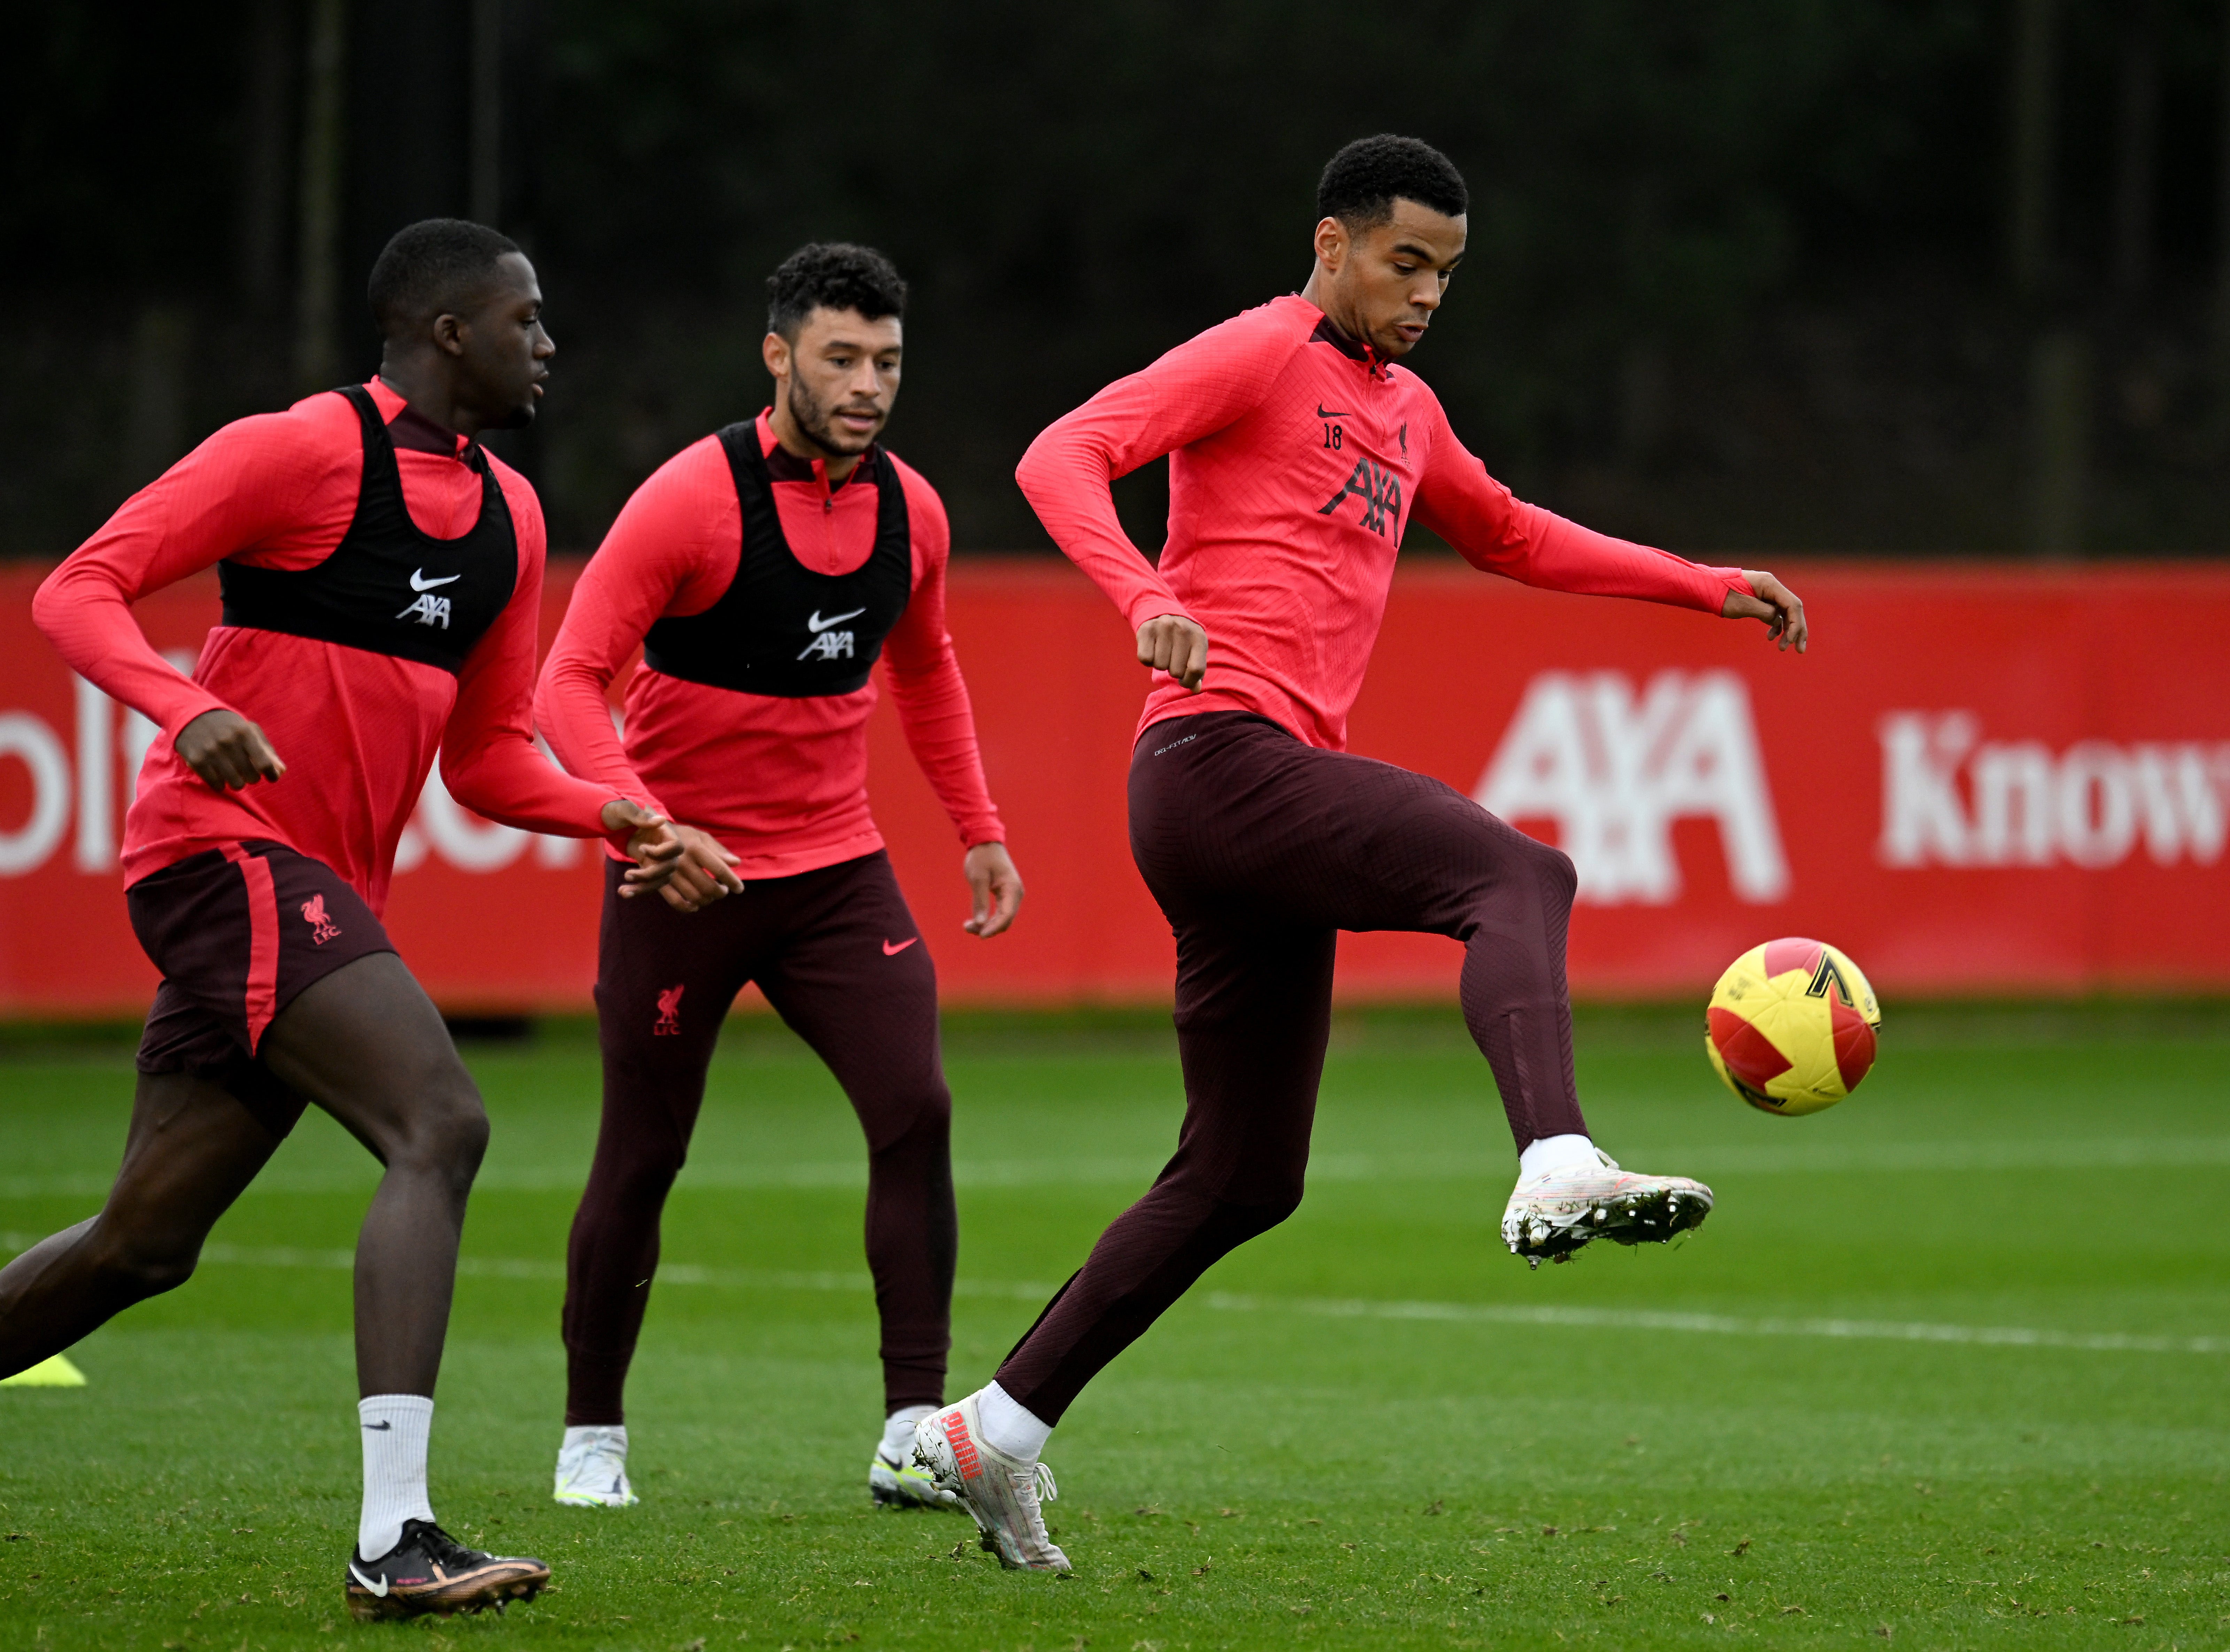 Cody Gakpo, Alex Oxlade-Chamberlain and Ibrahima Konate of Liverpool during a training session